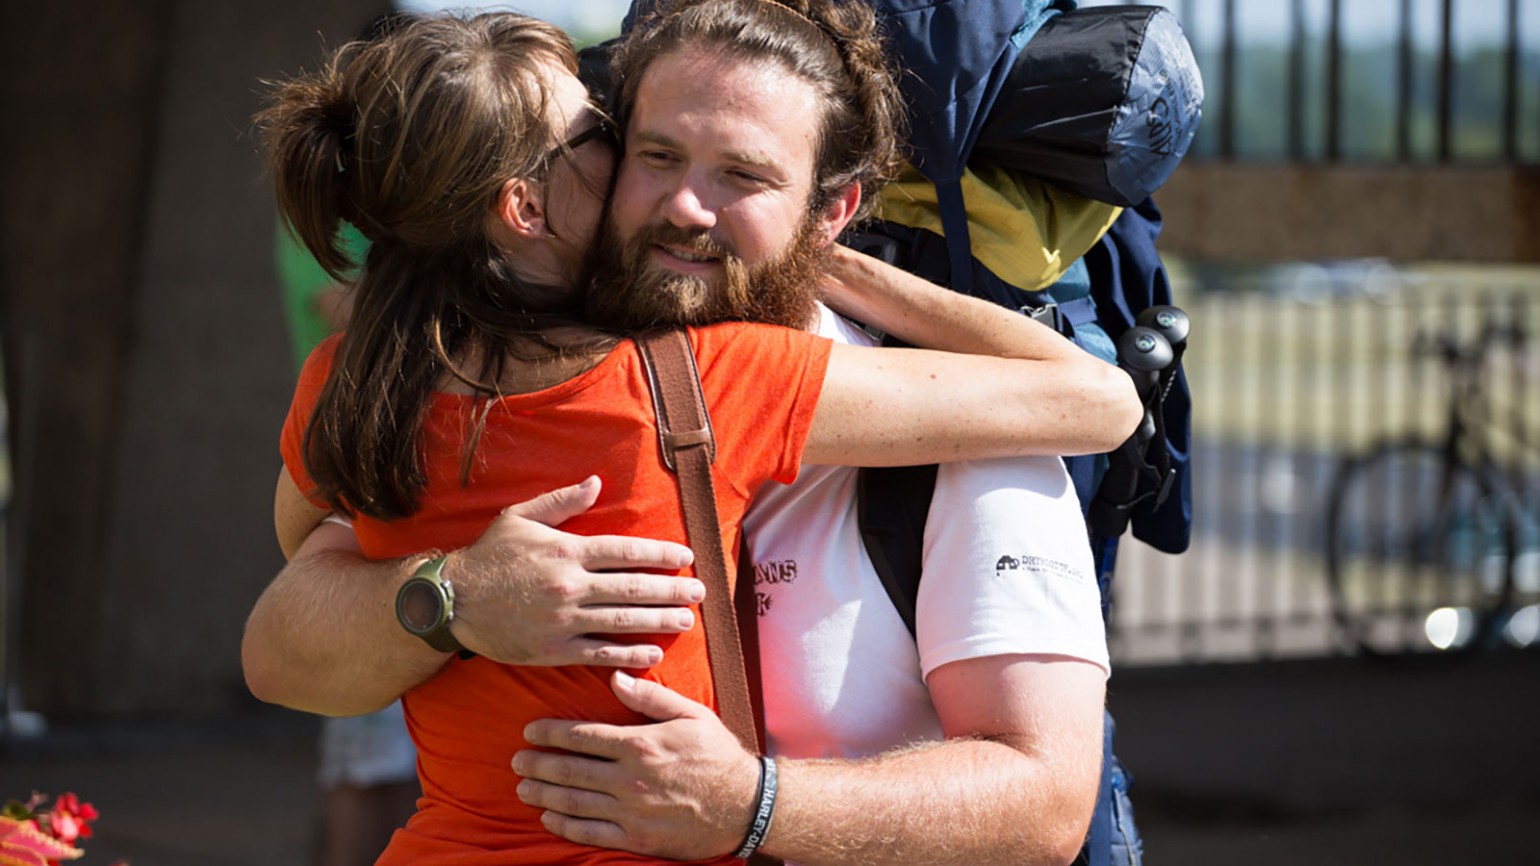 Tom Voss being given a warm welcome after completing his 2,700 mile trek across America. Photo courtesy of Michael Collins.